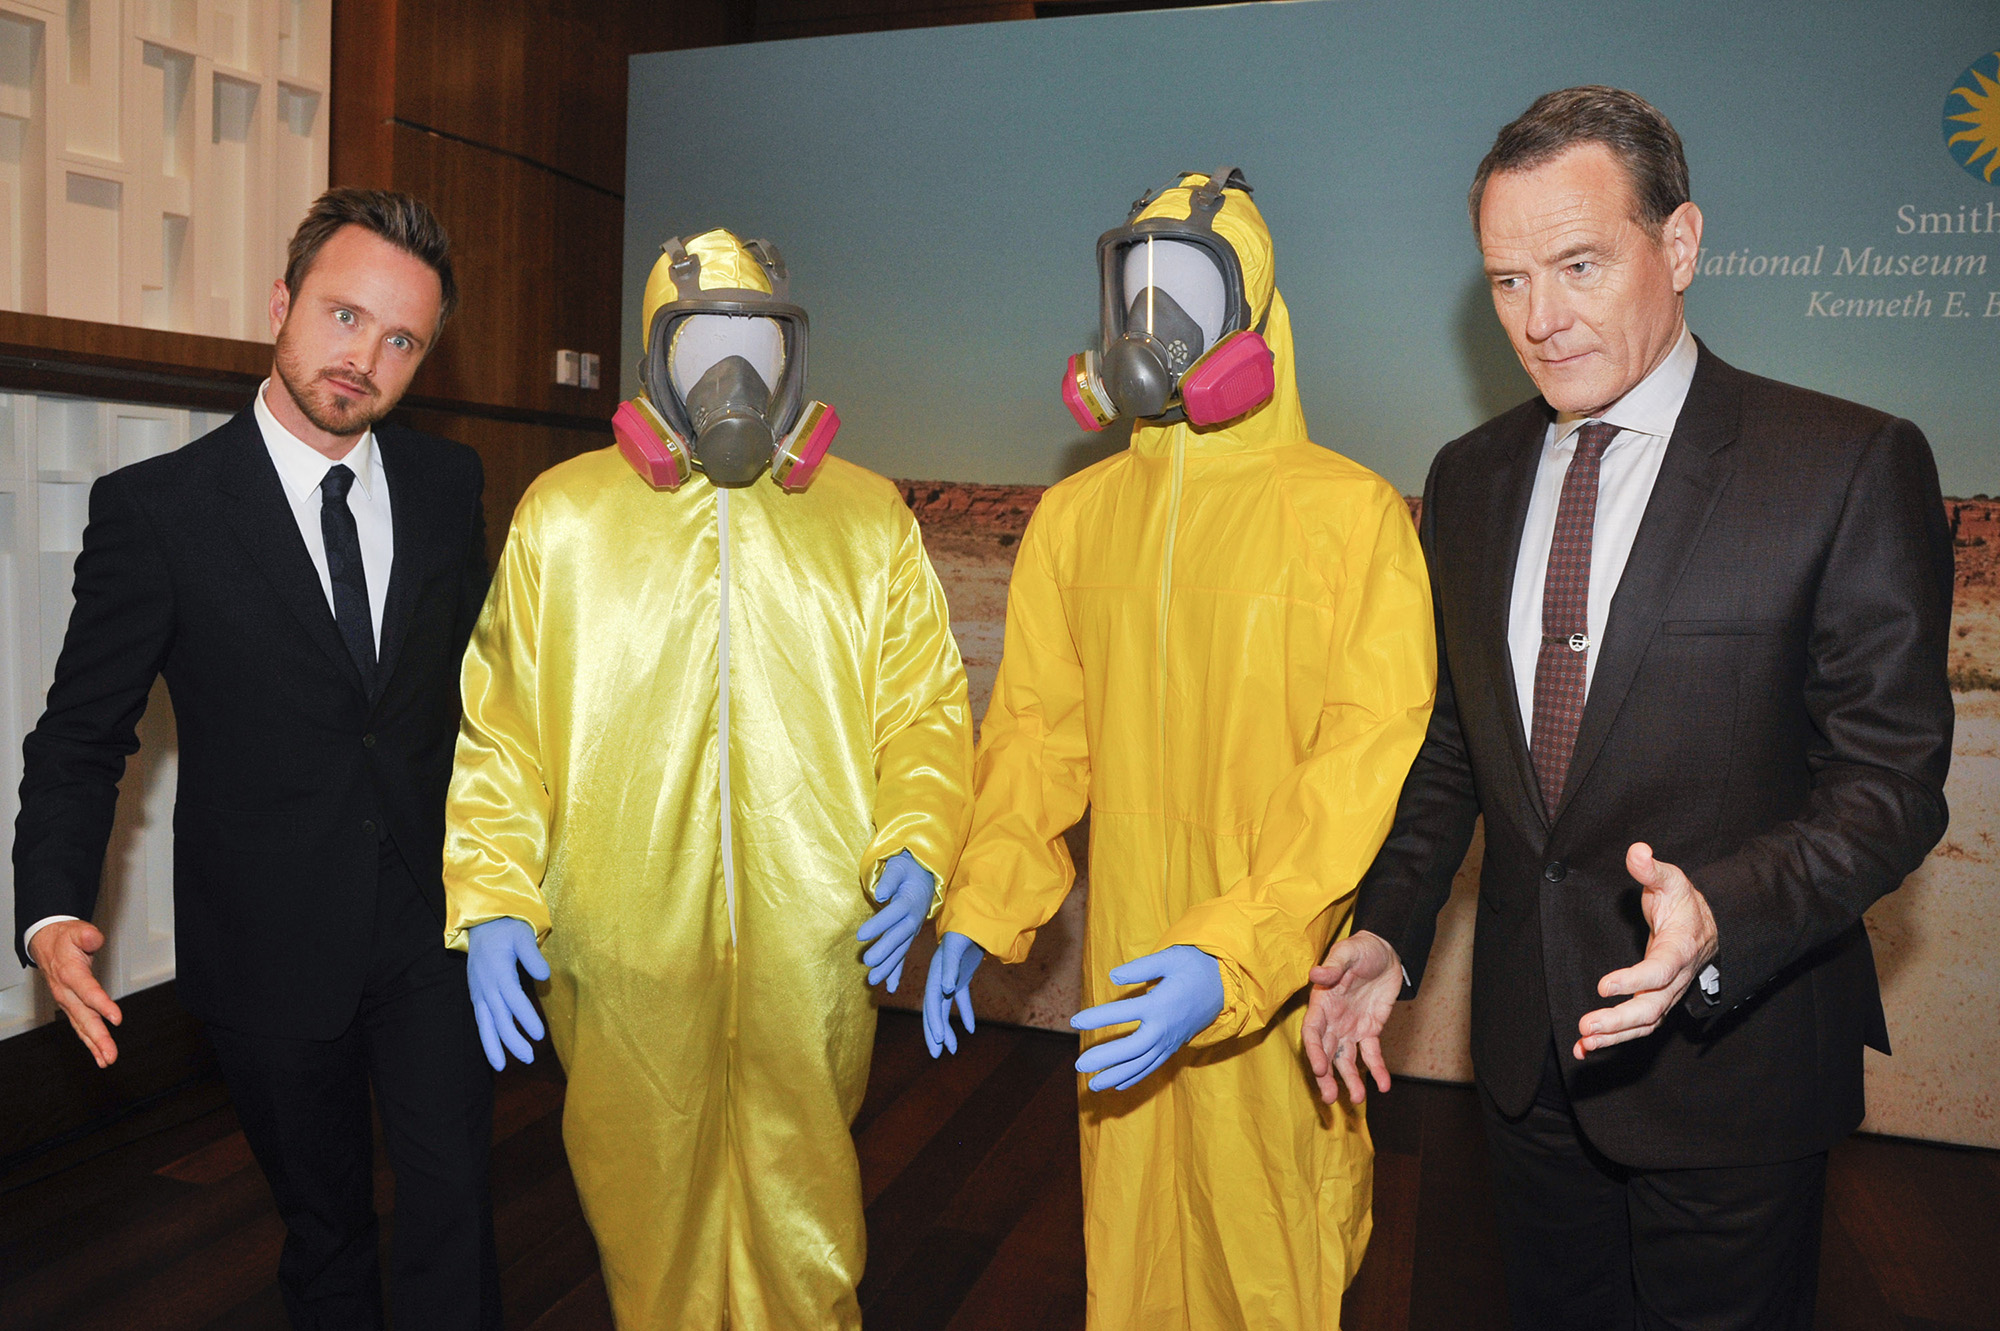 Smithsonian's National Museum of American History "Breaking Bad" Collection